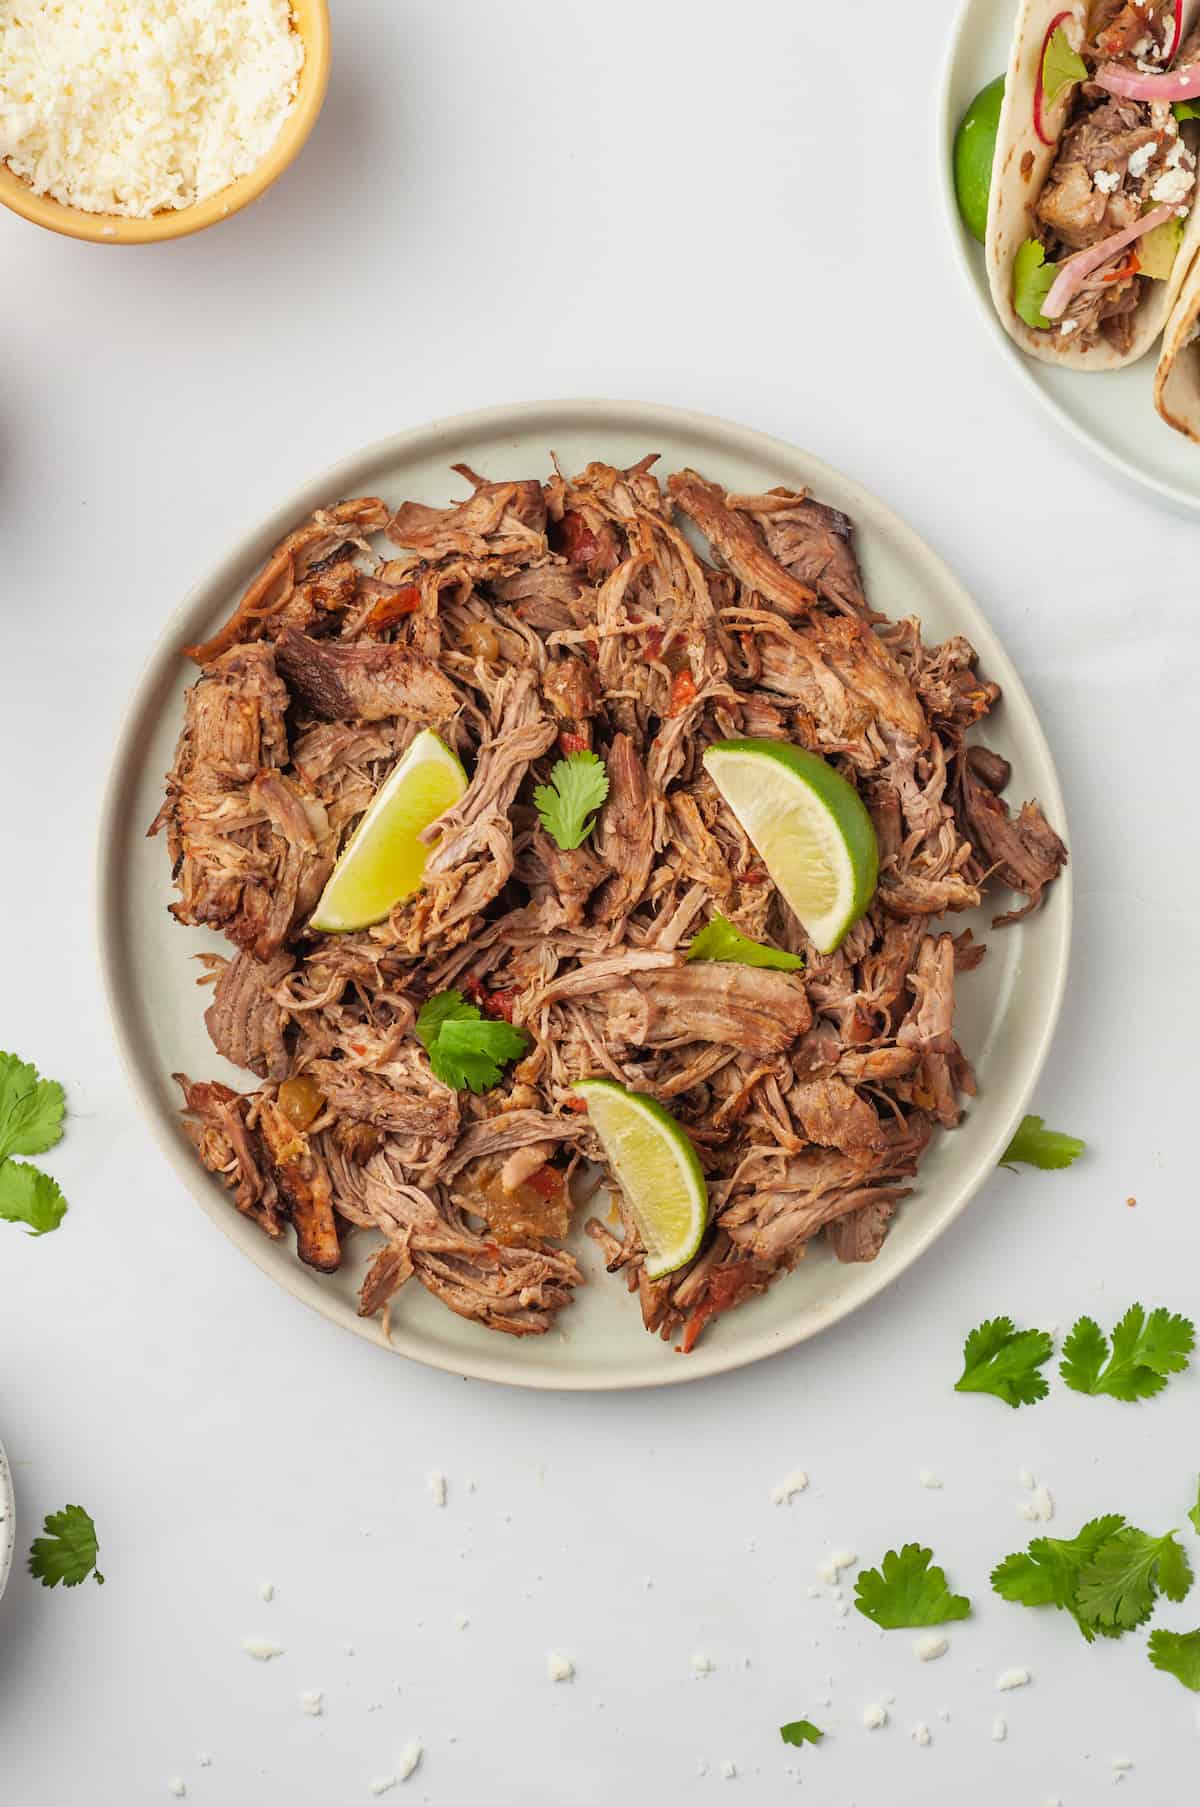 Plate of pork carnitas garnished with lime wedges and cilantro